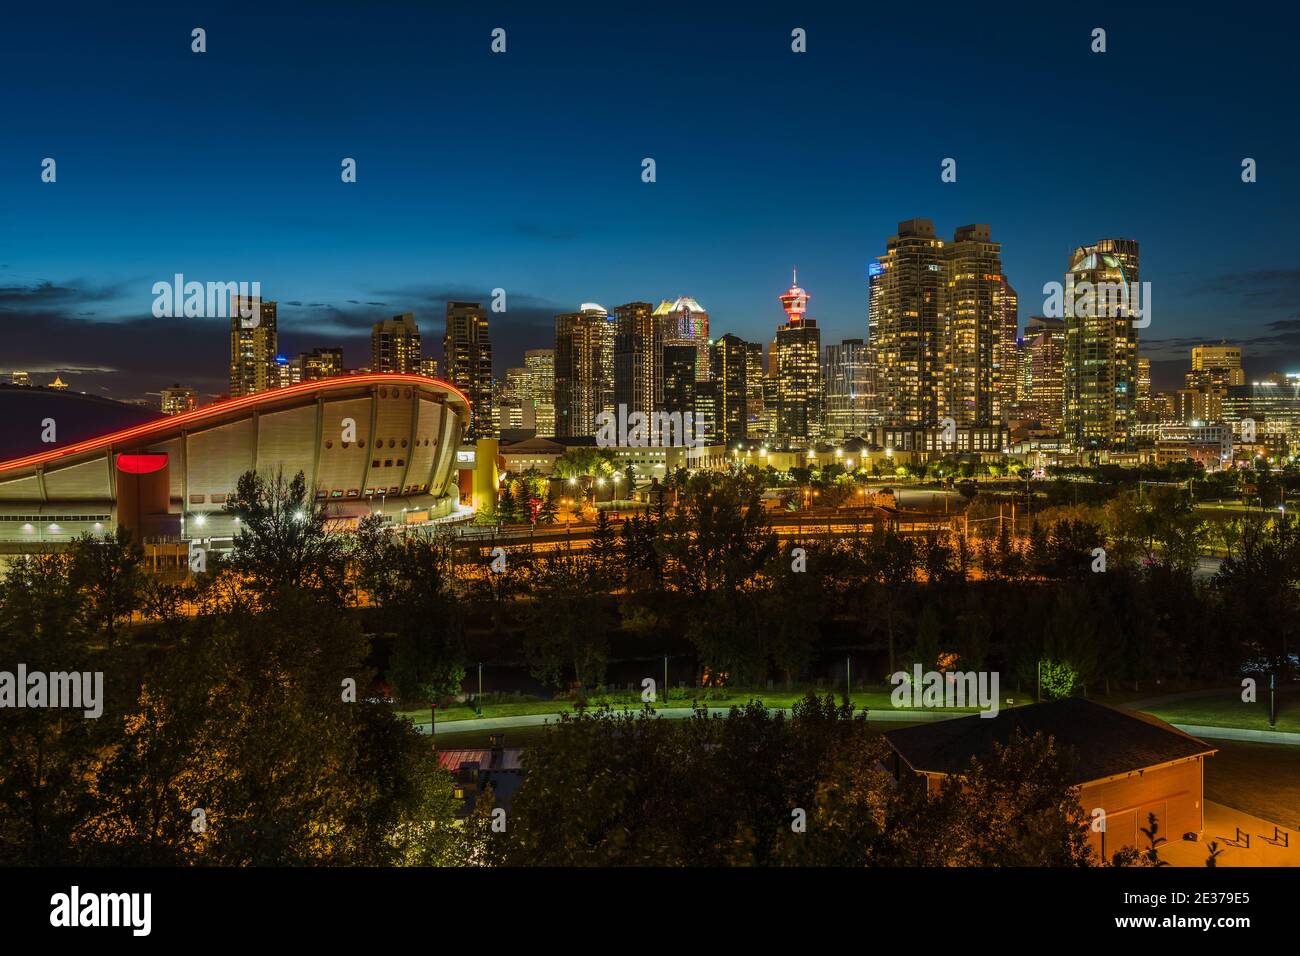 Calgary, Alberta, Canada, panoramic view of Downtown Calgary showing high rise buildings in the financial district at night. Stock Photo